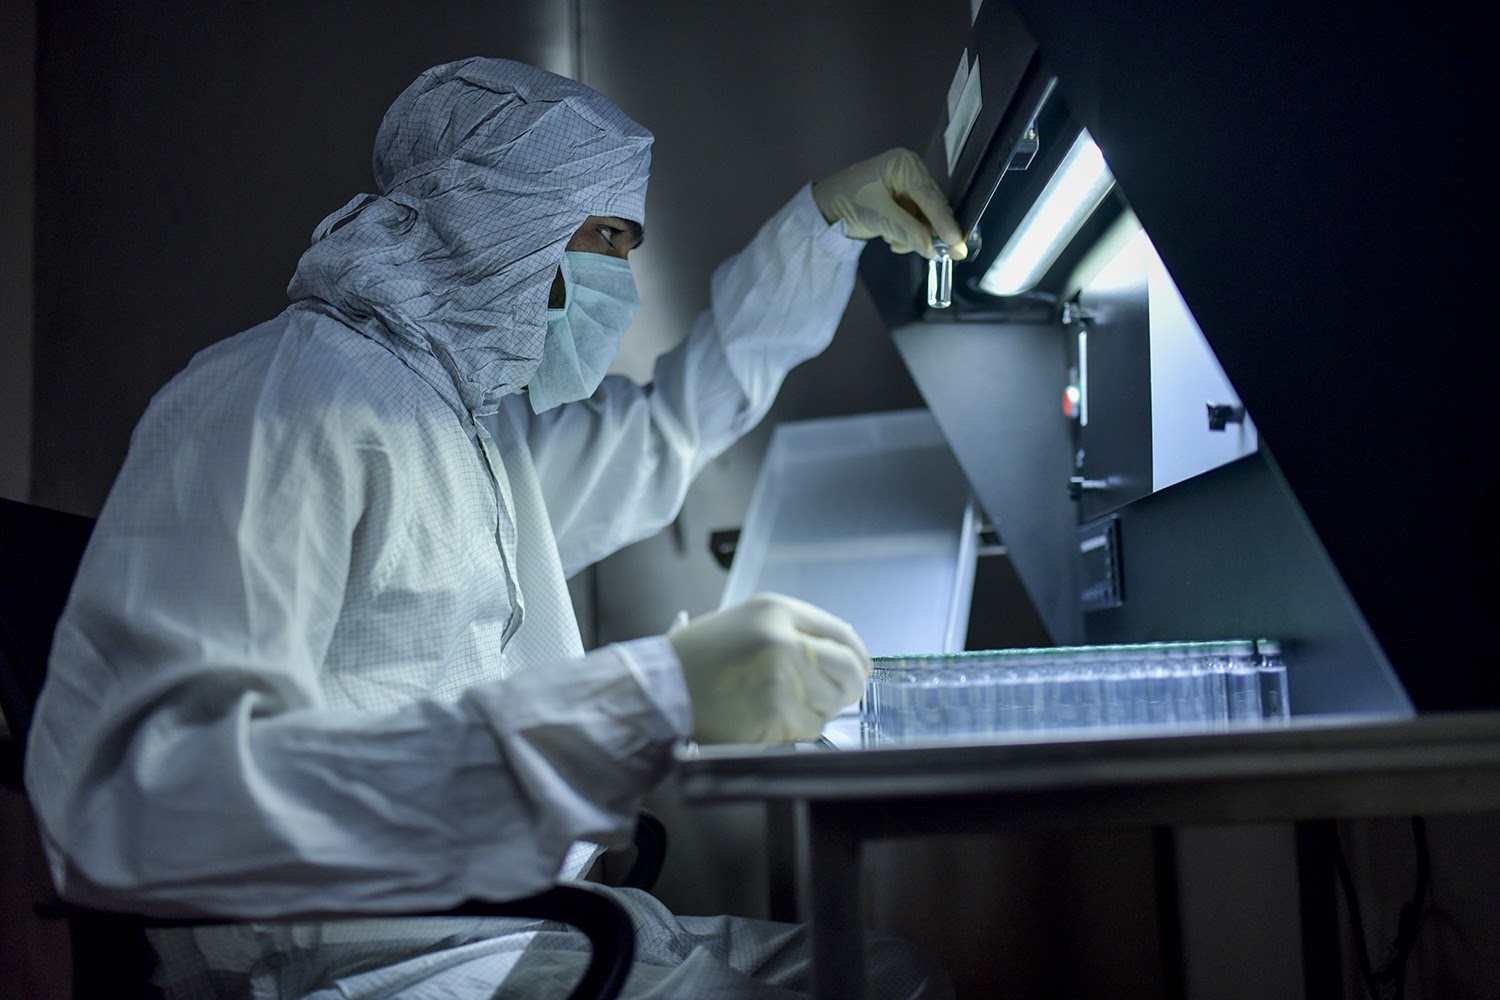 In a dark lab, a scientist in personal protective gear studies a glass vaccine vial.